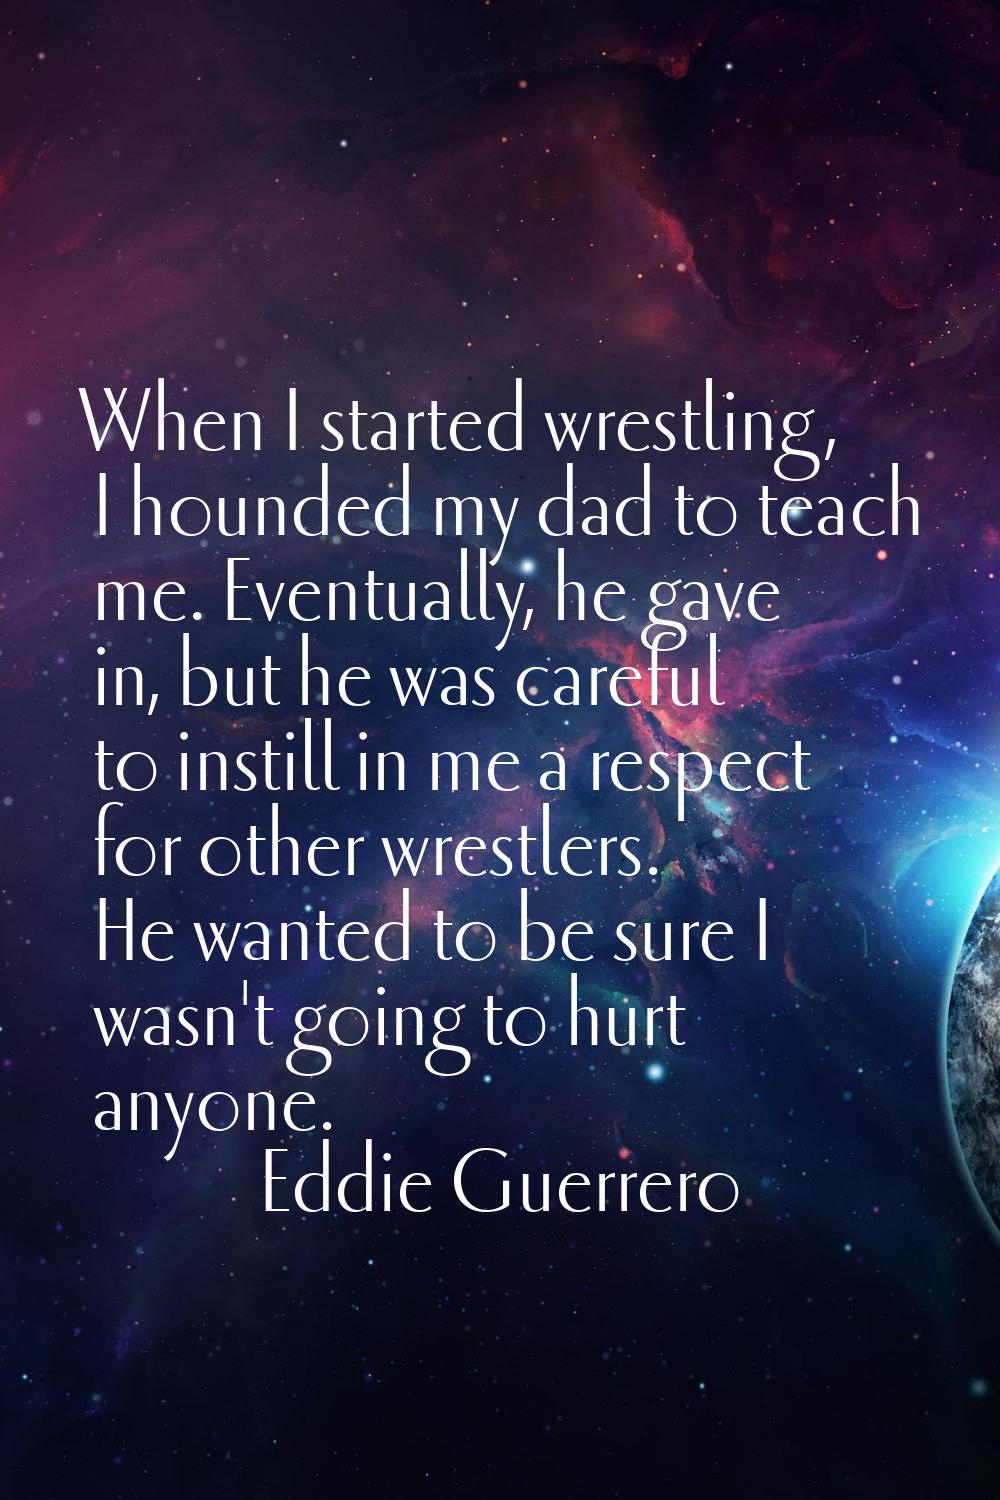 When I started wrestling, I hounded my dad to teach me. Eventually, he gave in, but he was careful 